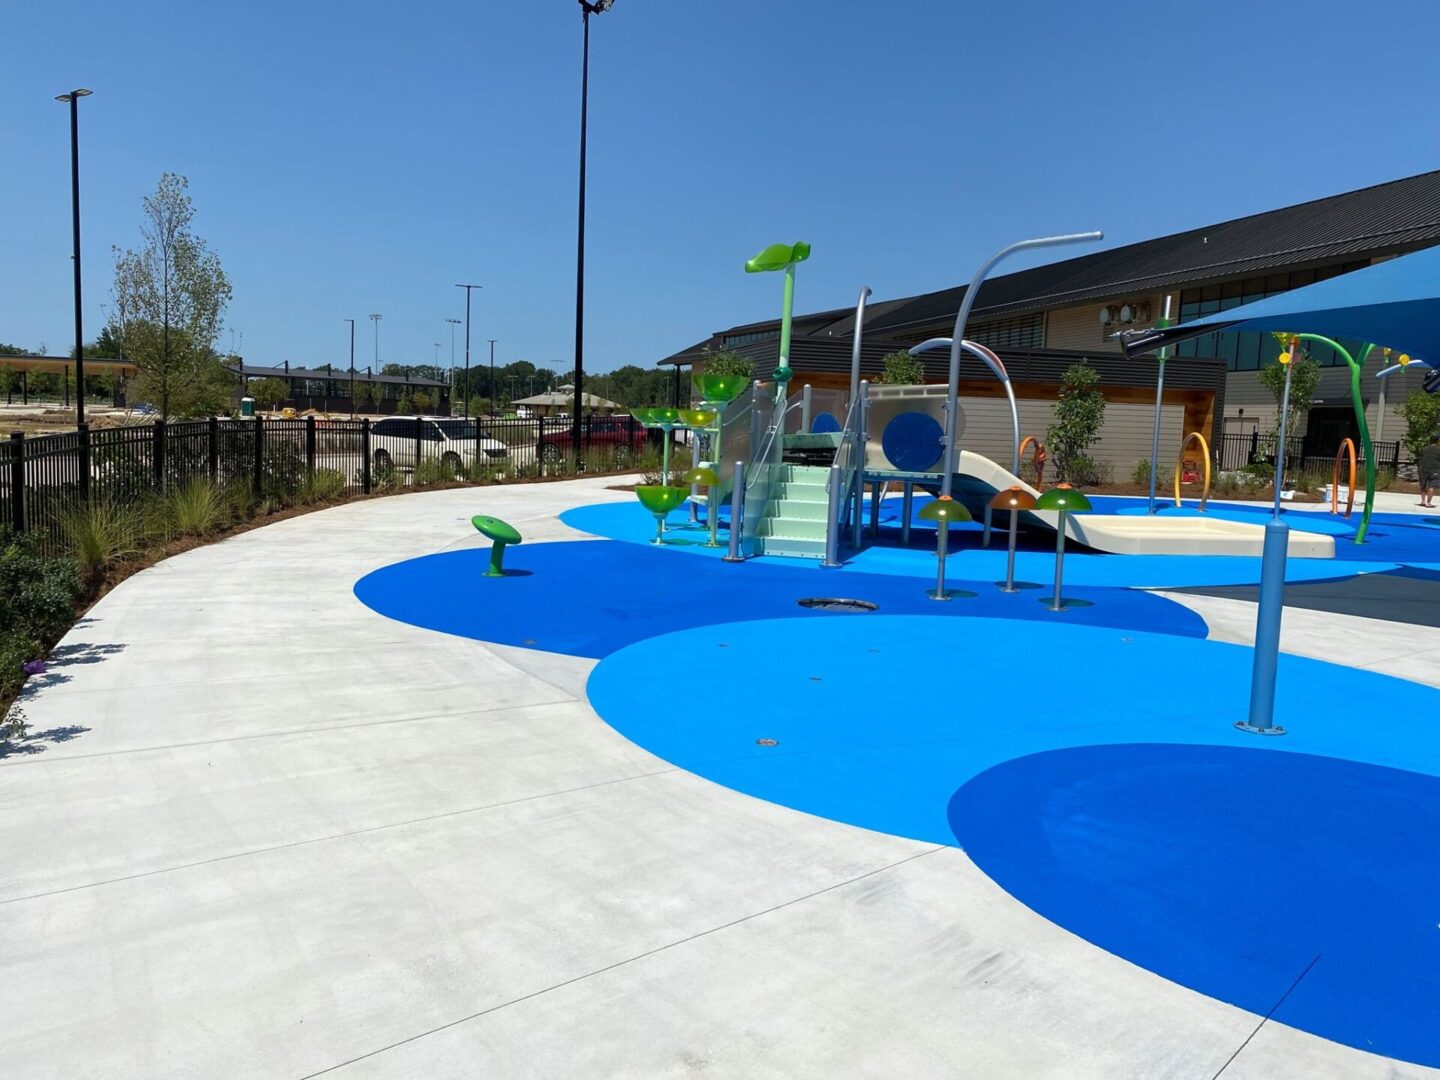 A playground with blue and white tiles in the middle of it.